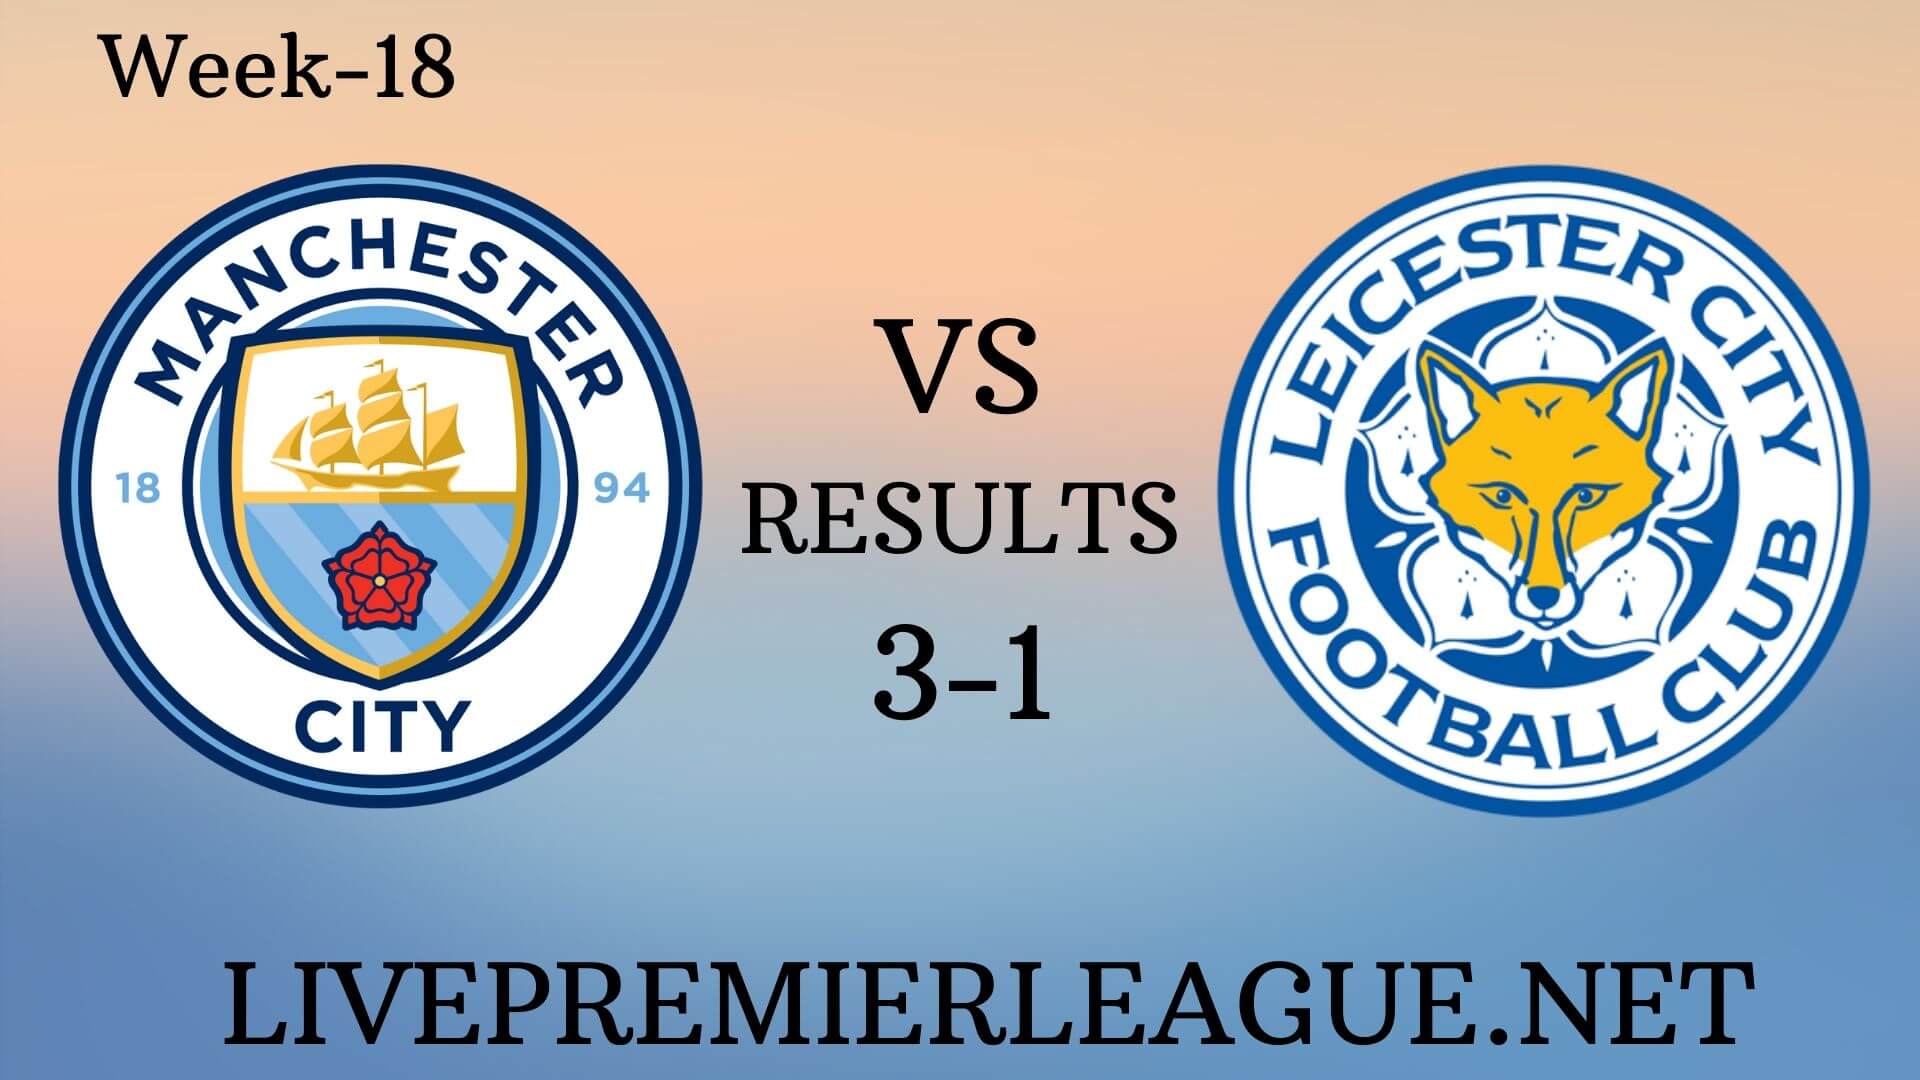 Manchester City Vs Leicester City | Week 18 Result 2019